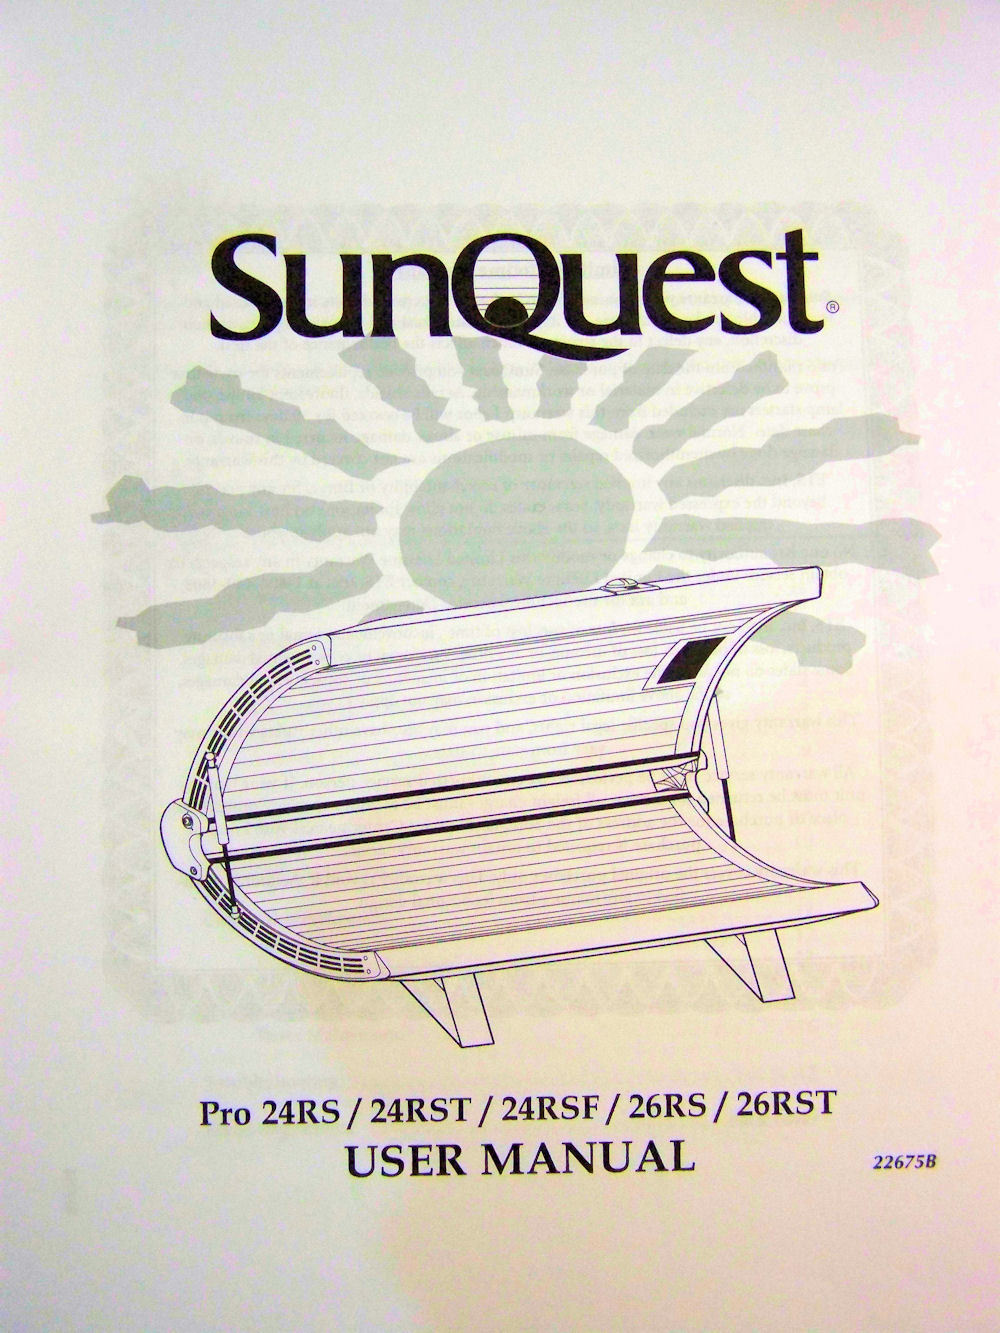 SunQuest Tanning Bed User Manual PRO 24RS 24RTS 24RSF 26RS 26RTS Beds  - $10.00